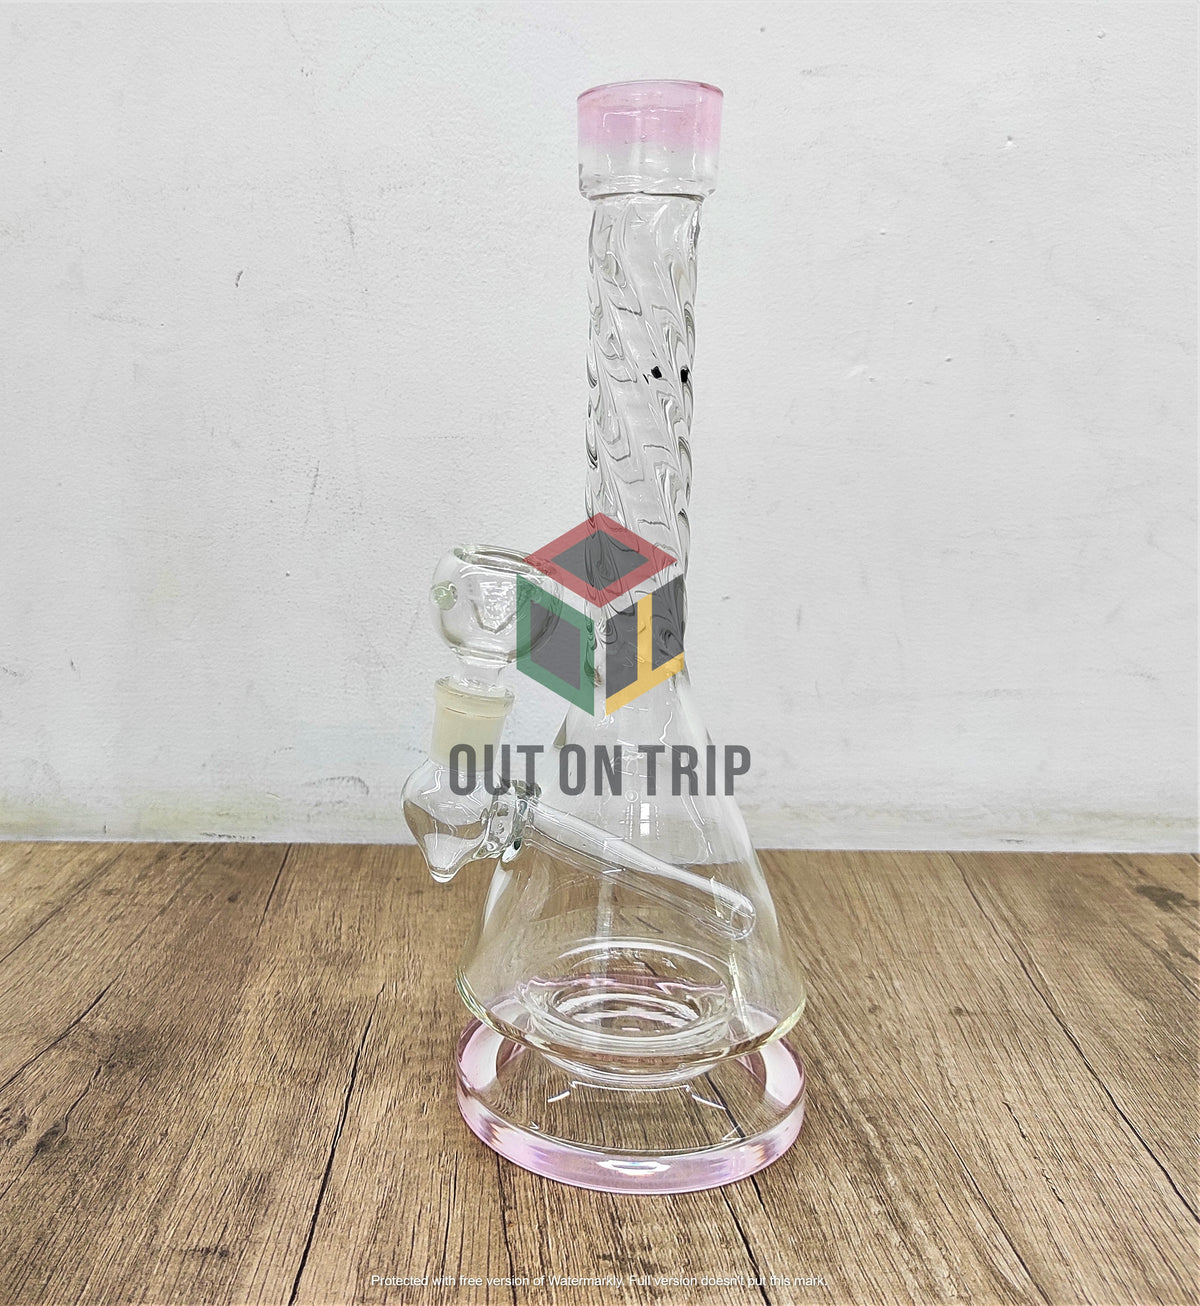 10 Inch  Assorted Colors Bong with Spiral Neck